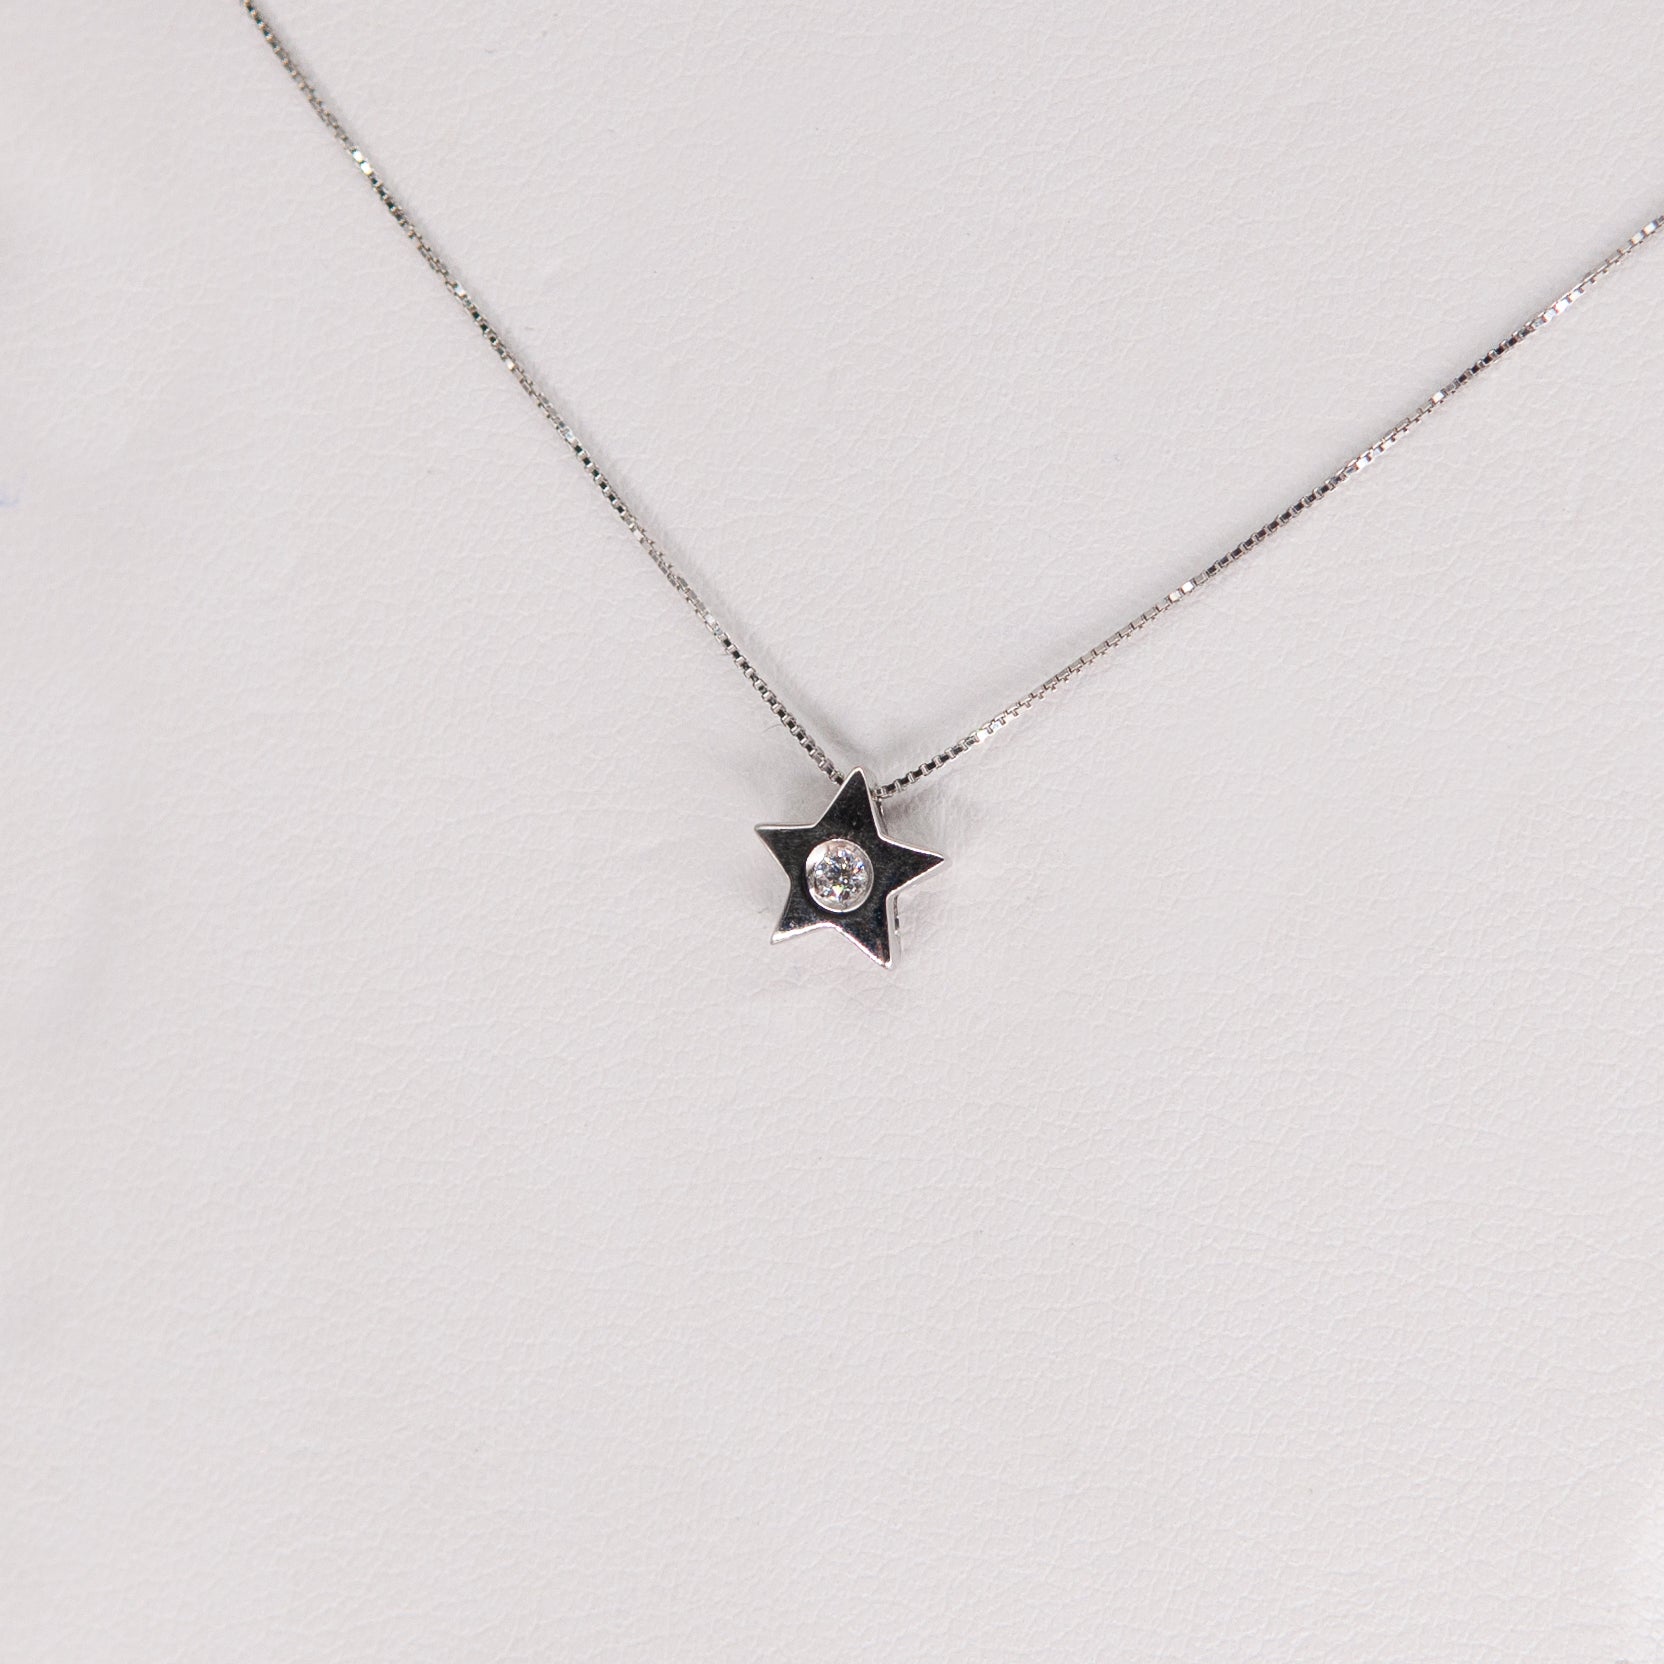 Full star necklace with diamond